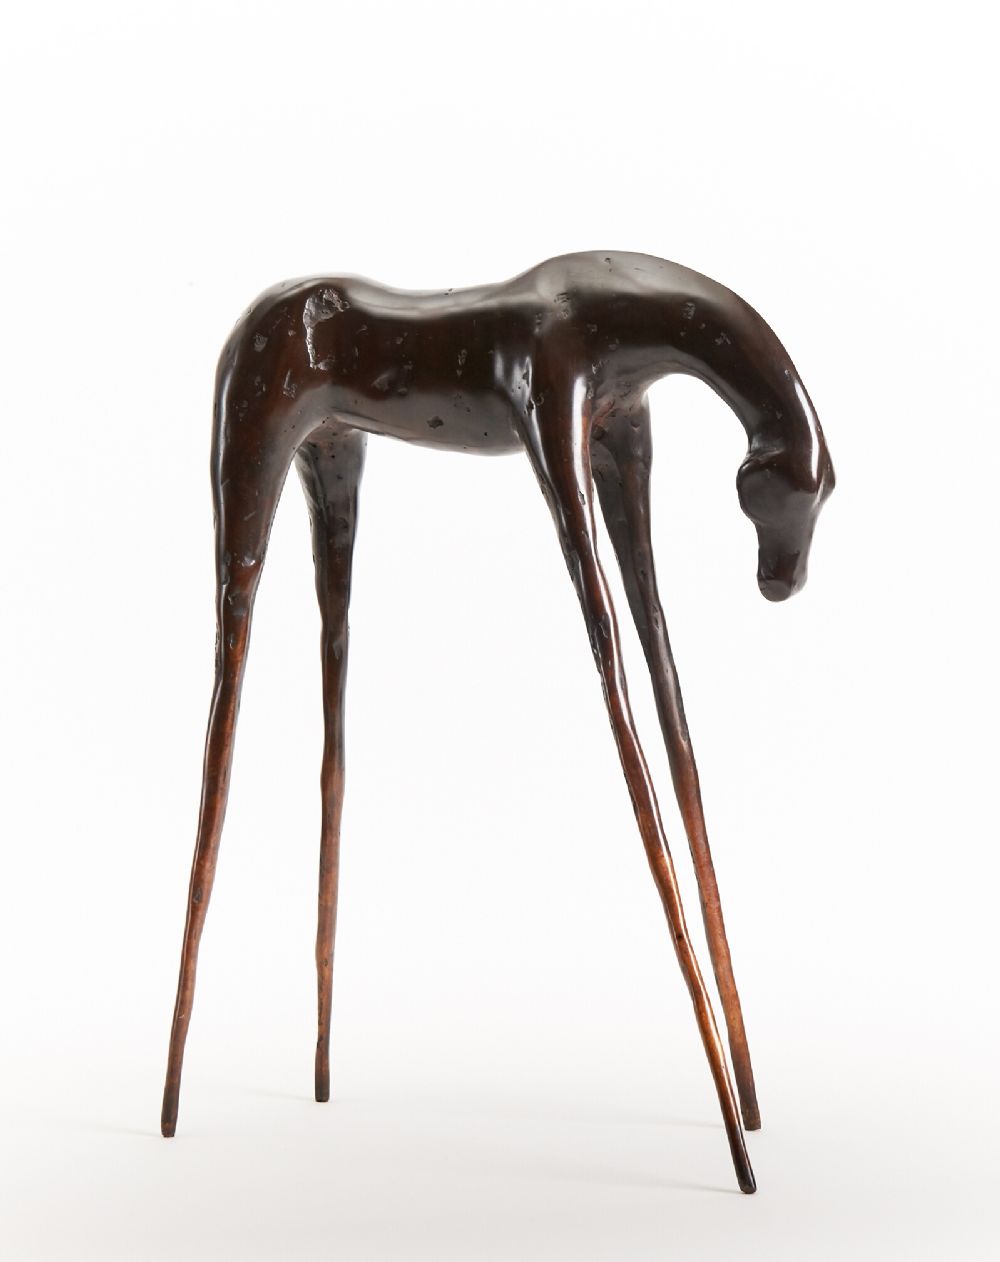 REVERENT HORSE by Anna Campbell sold for €2,000 at deVeres Auctions